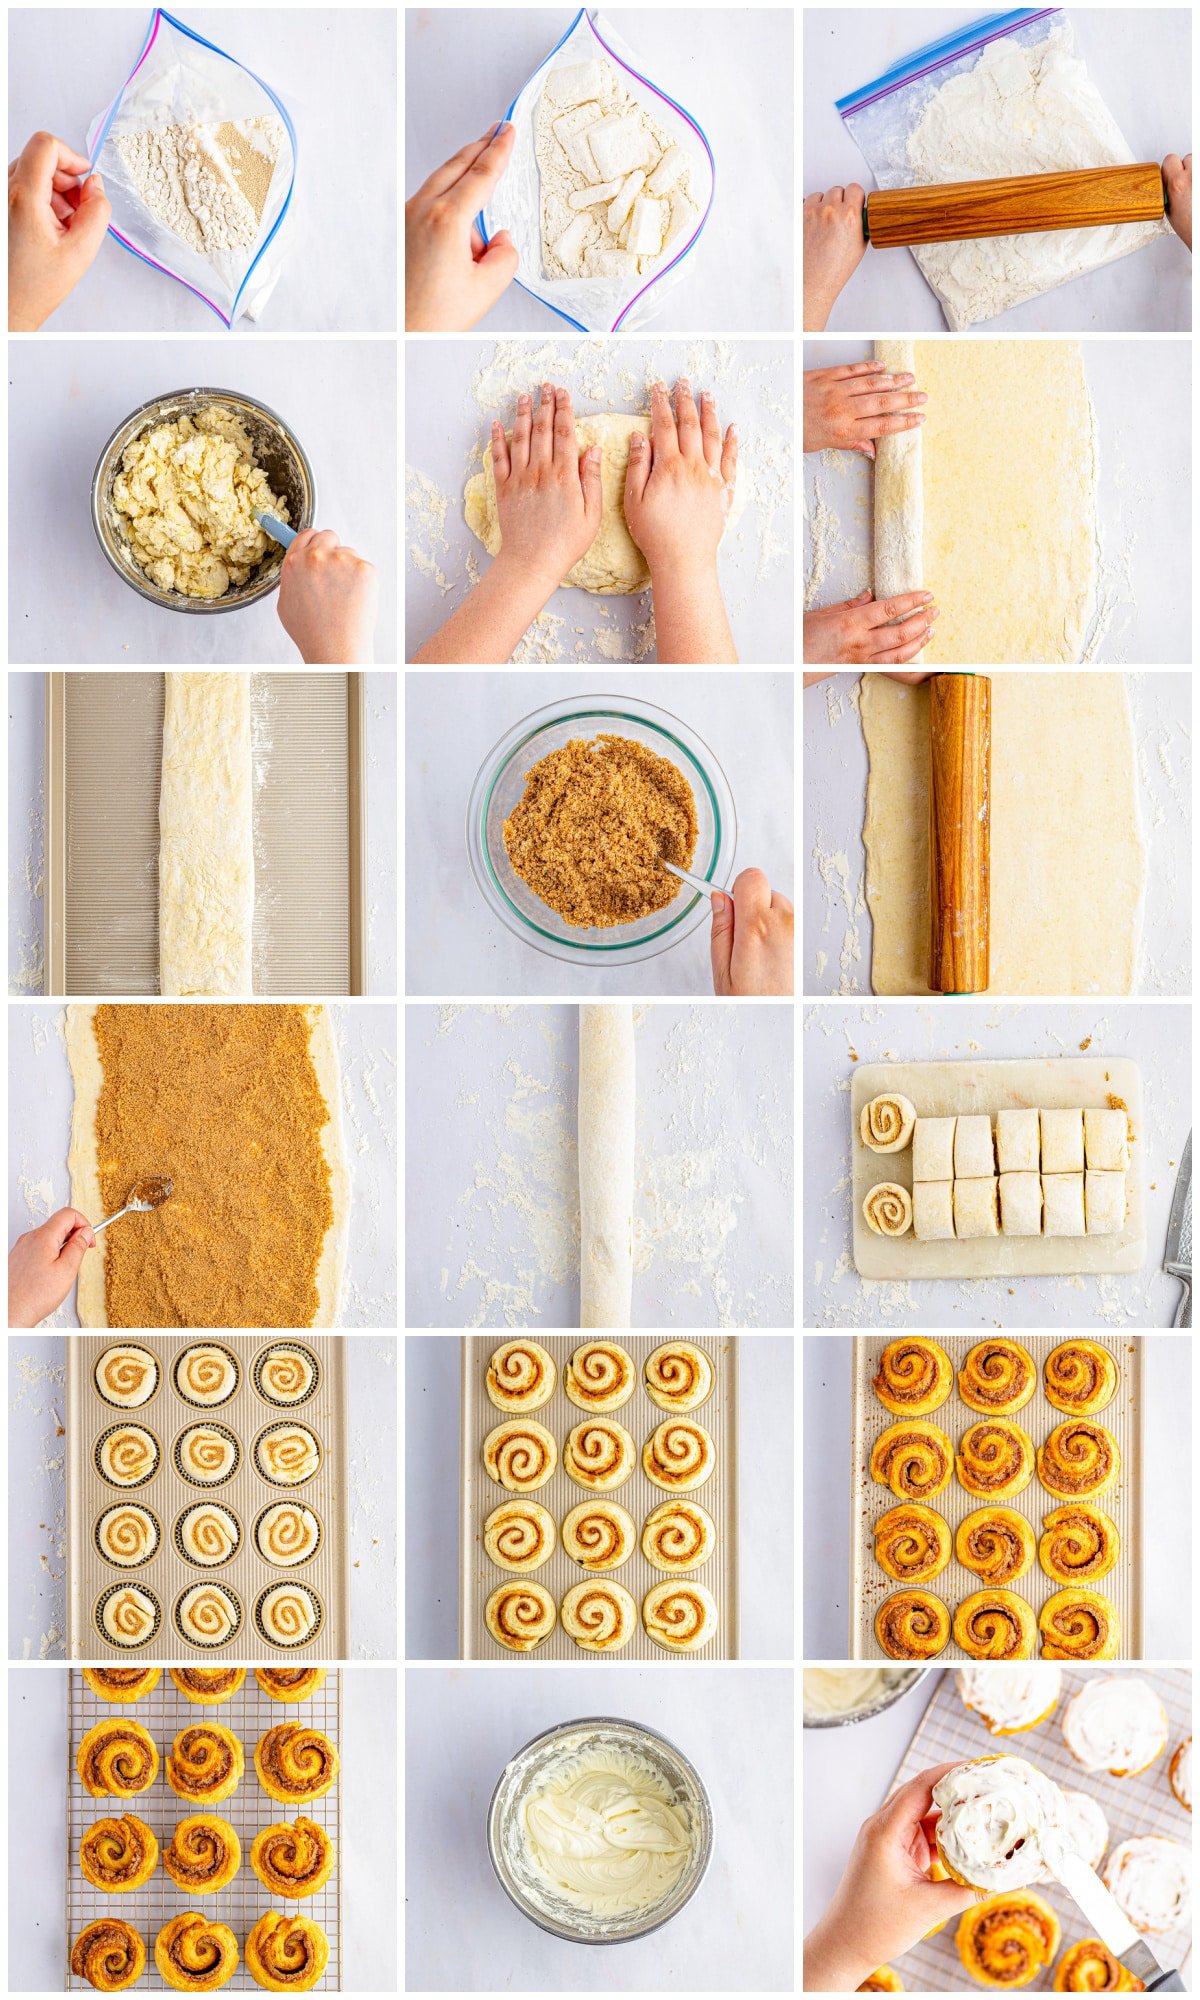 Step by step photos on how to make Cinnamon Roll Buns.